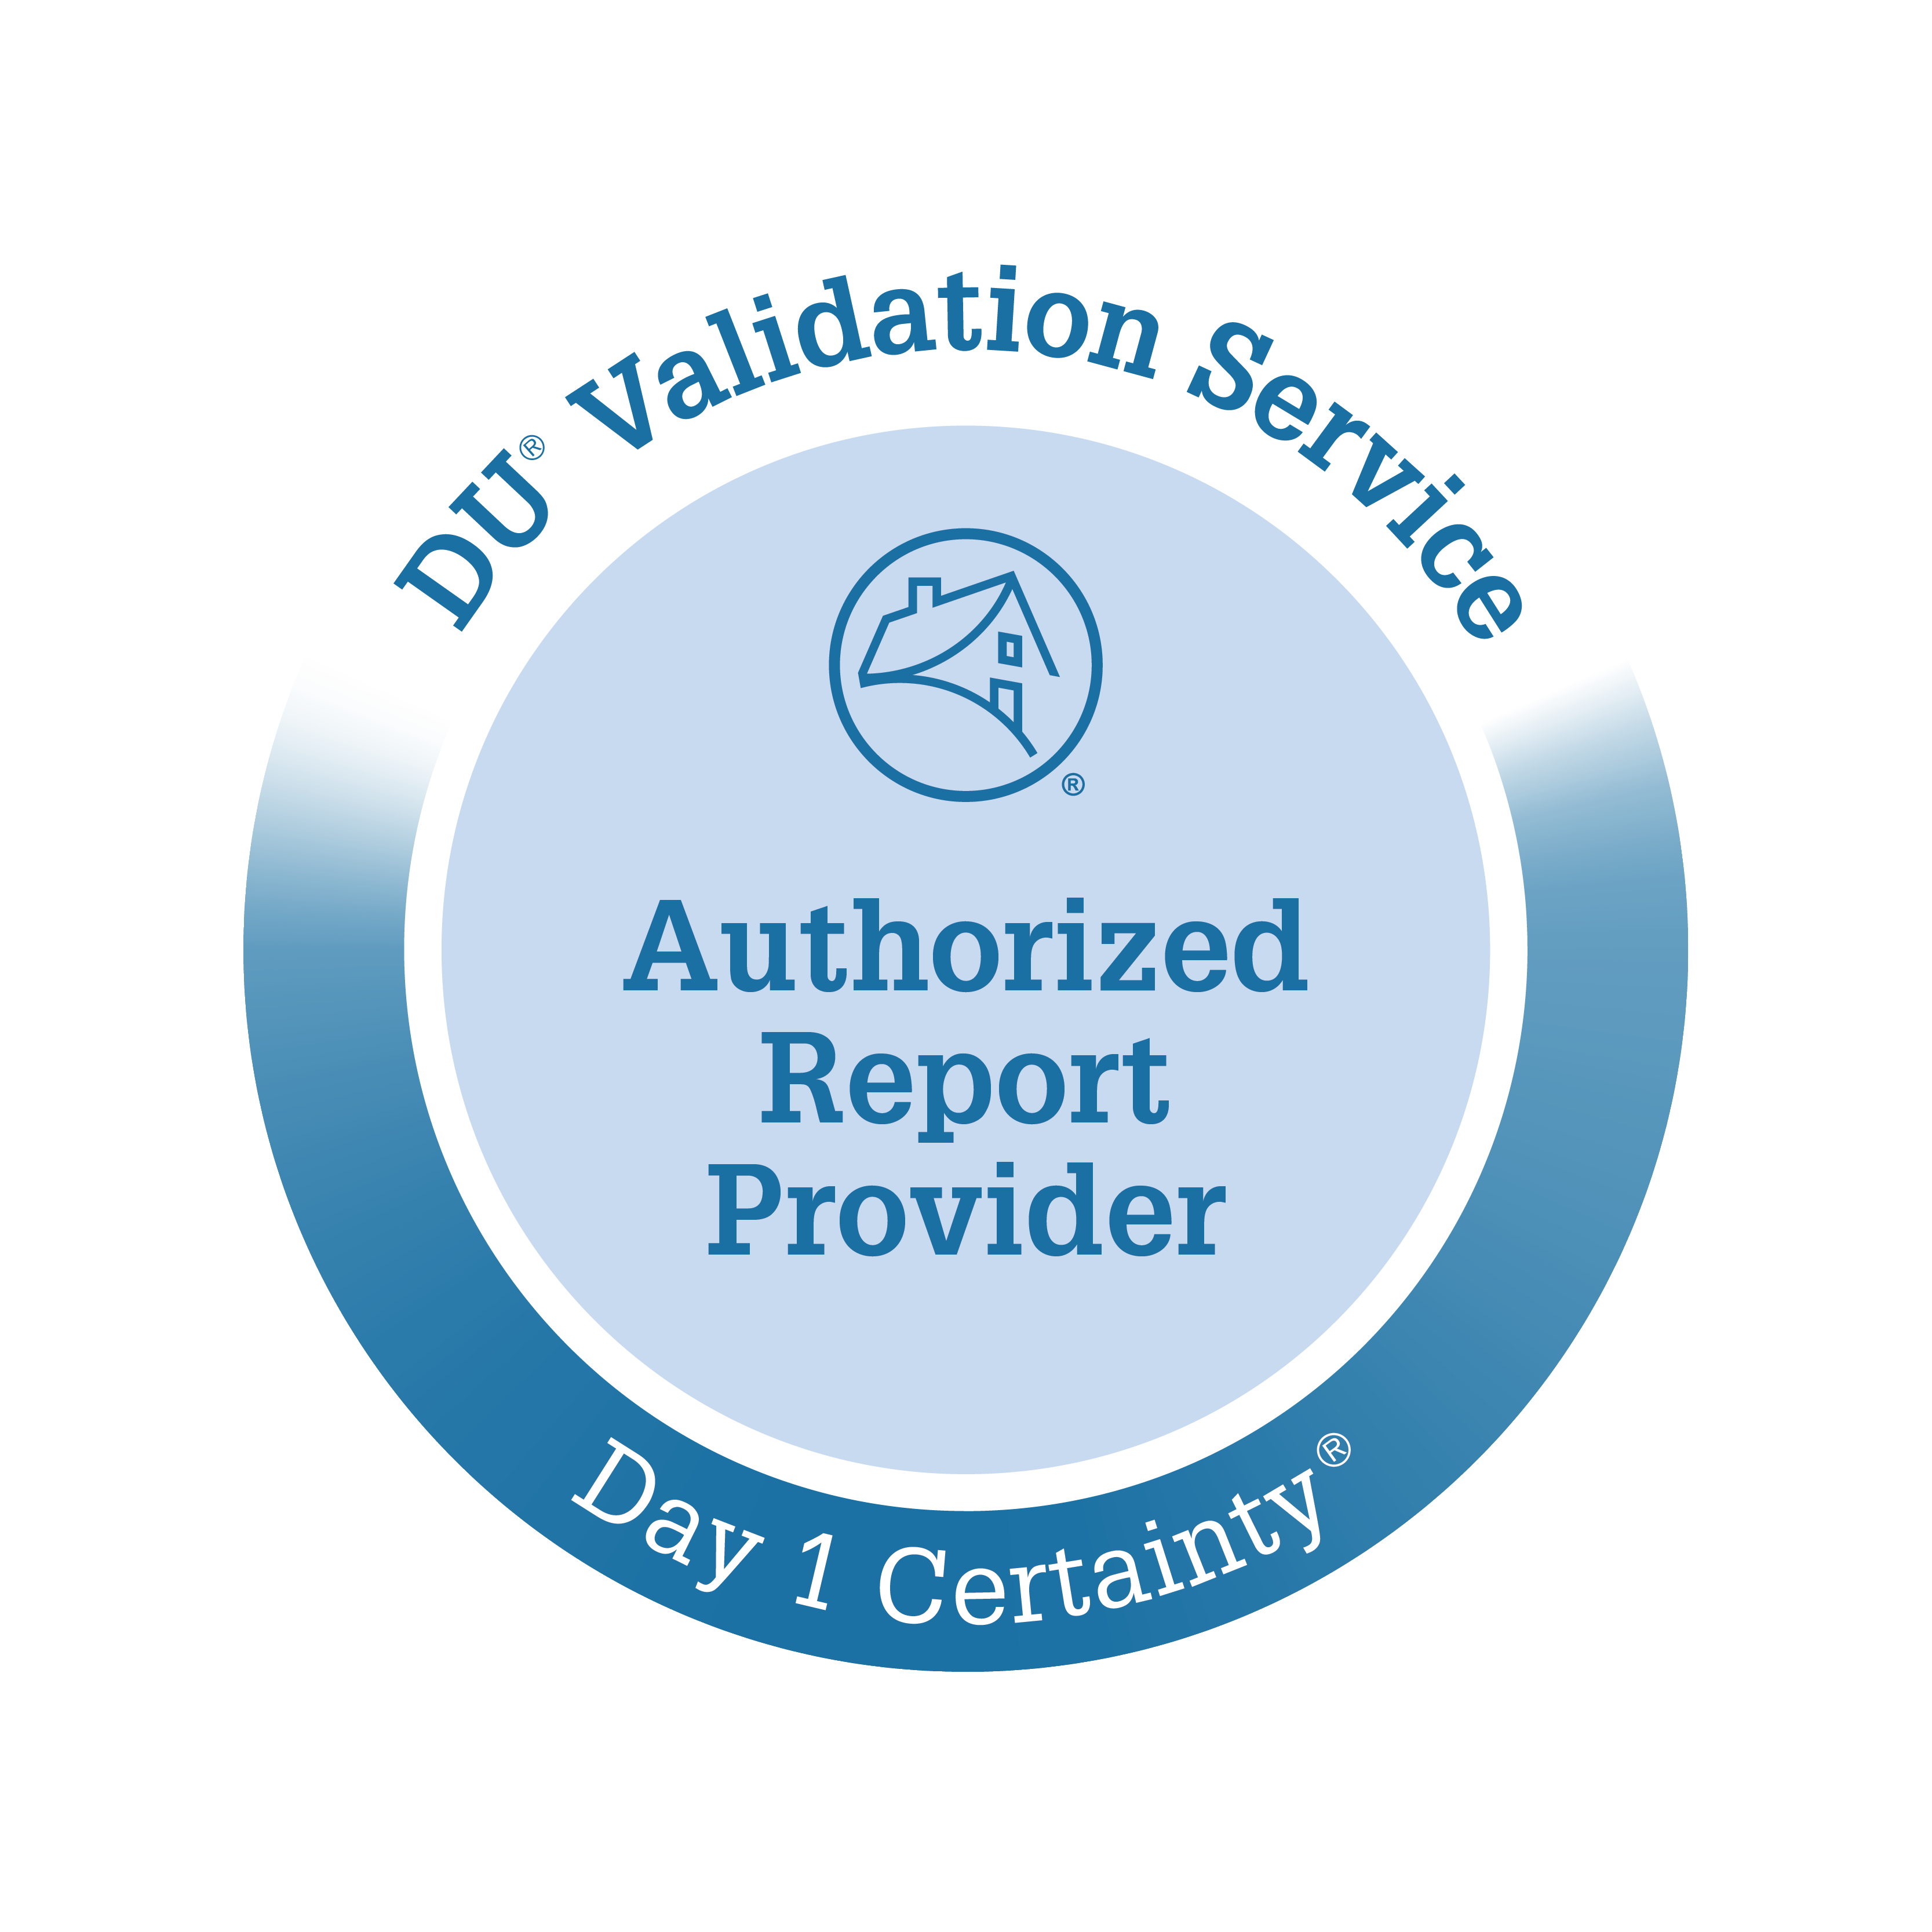 Day 1 Certainty provider badge